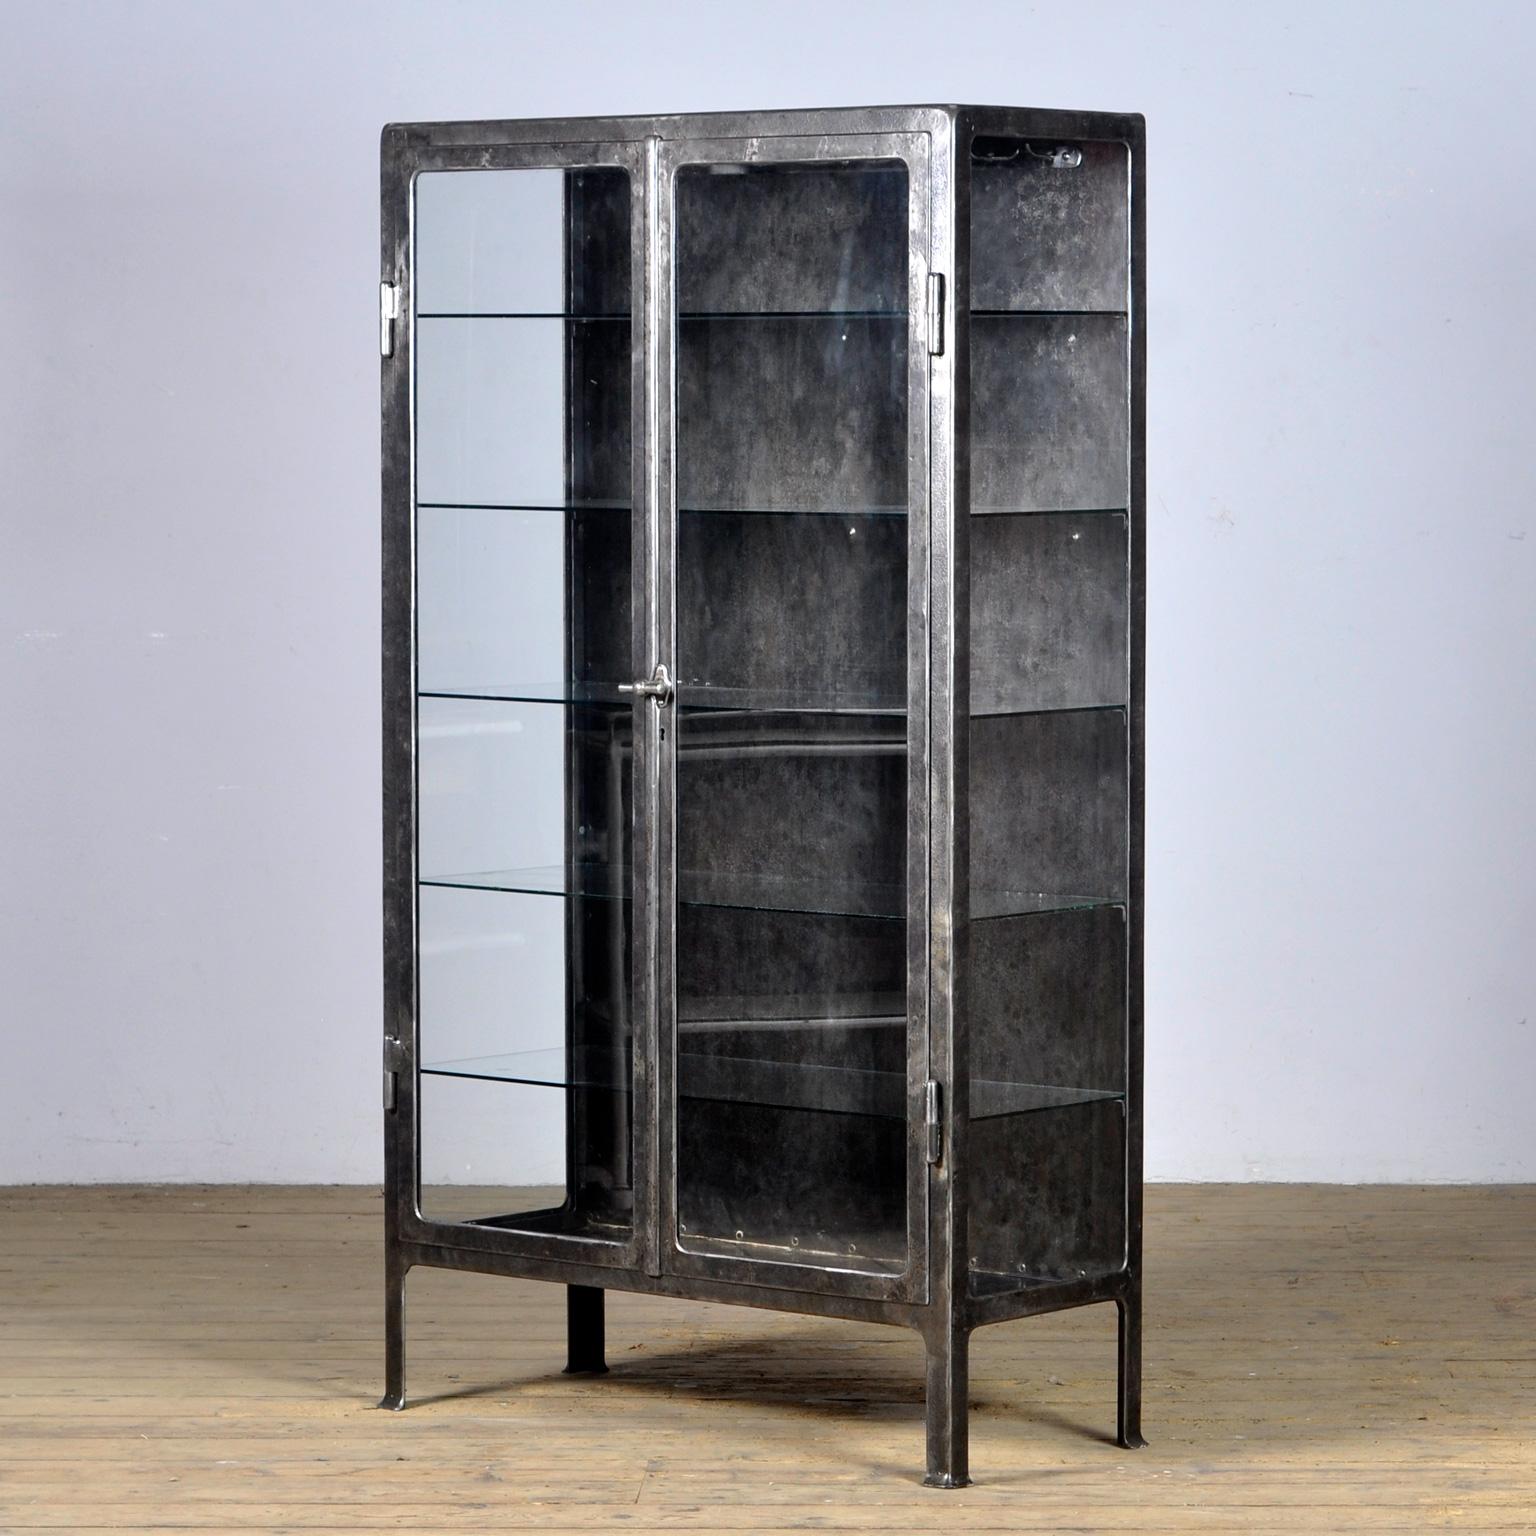 Hungarian Vintage Glass & Iron Medical Cabinet, 1920s For Sale